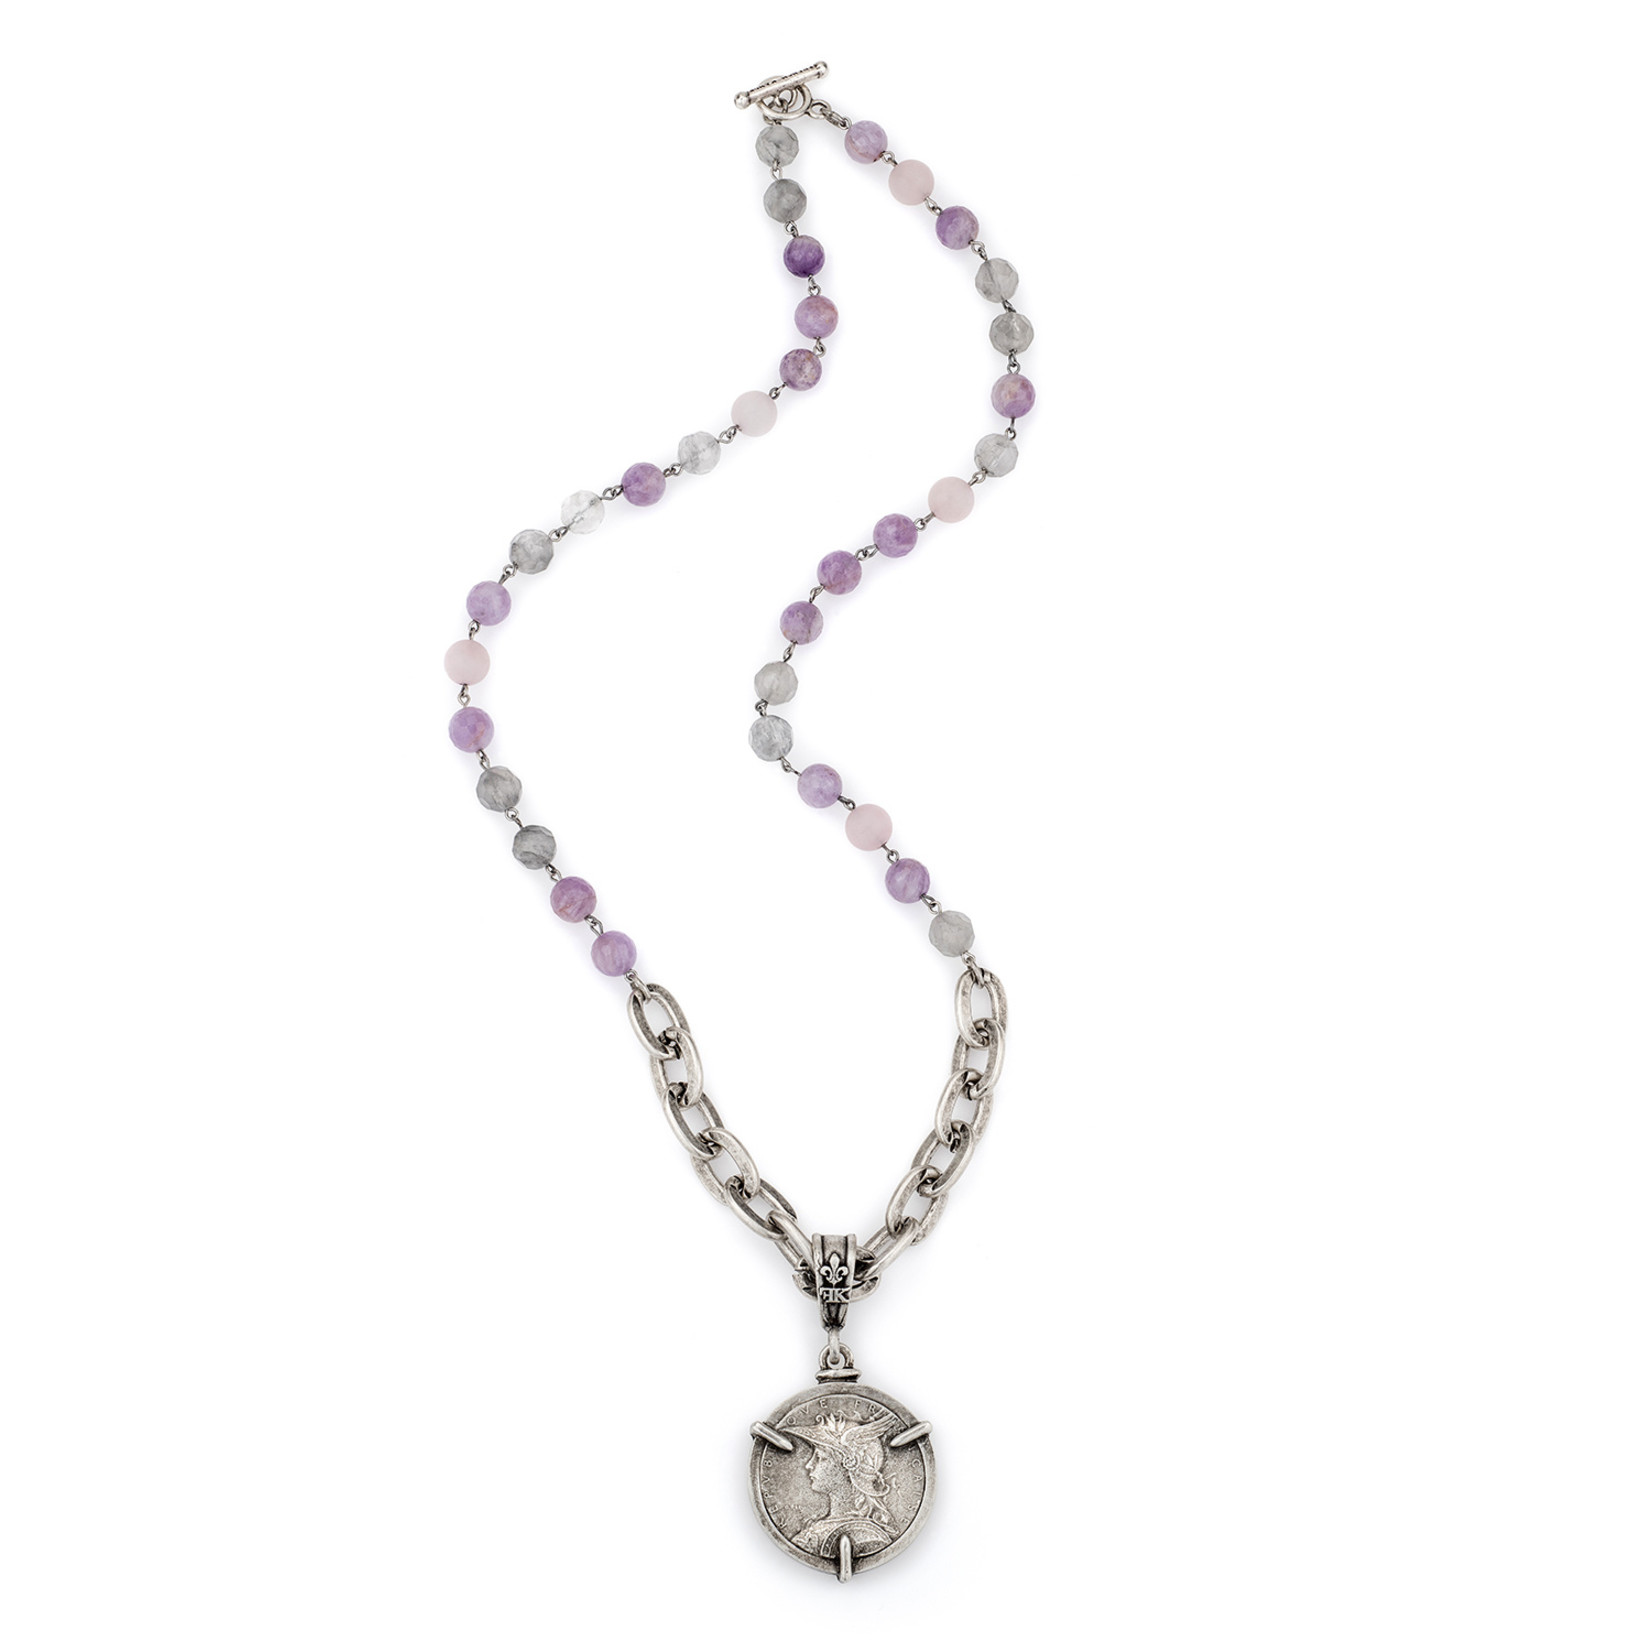 French Kande Lavender and Lourdes Chain with Ministry Medallion